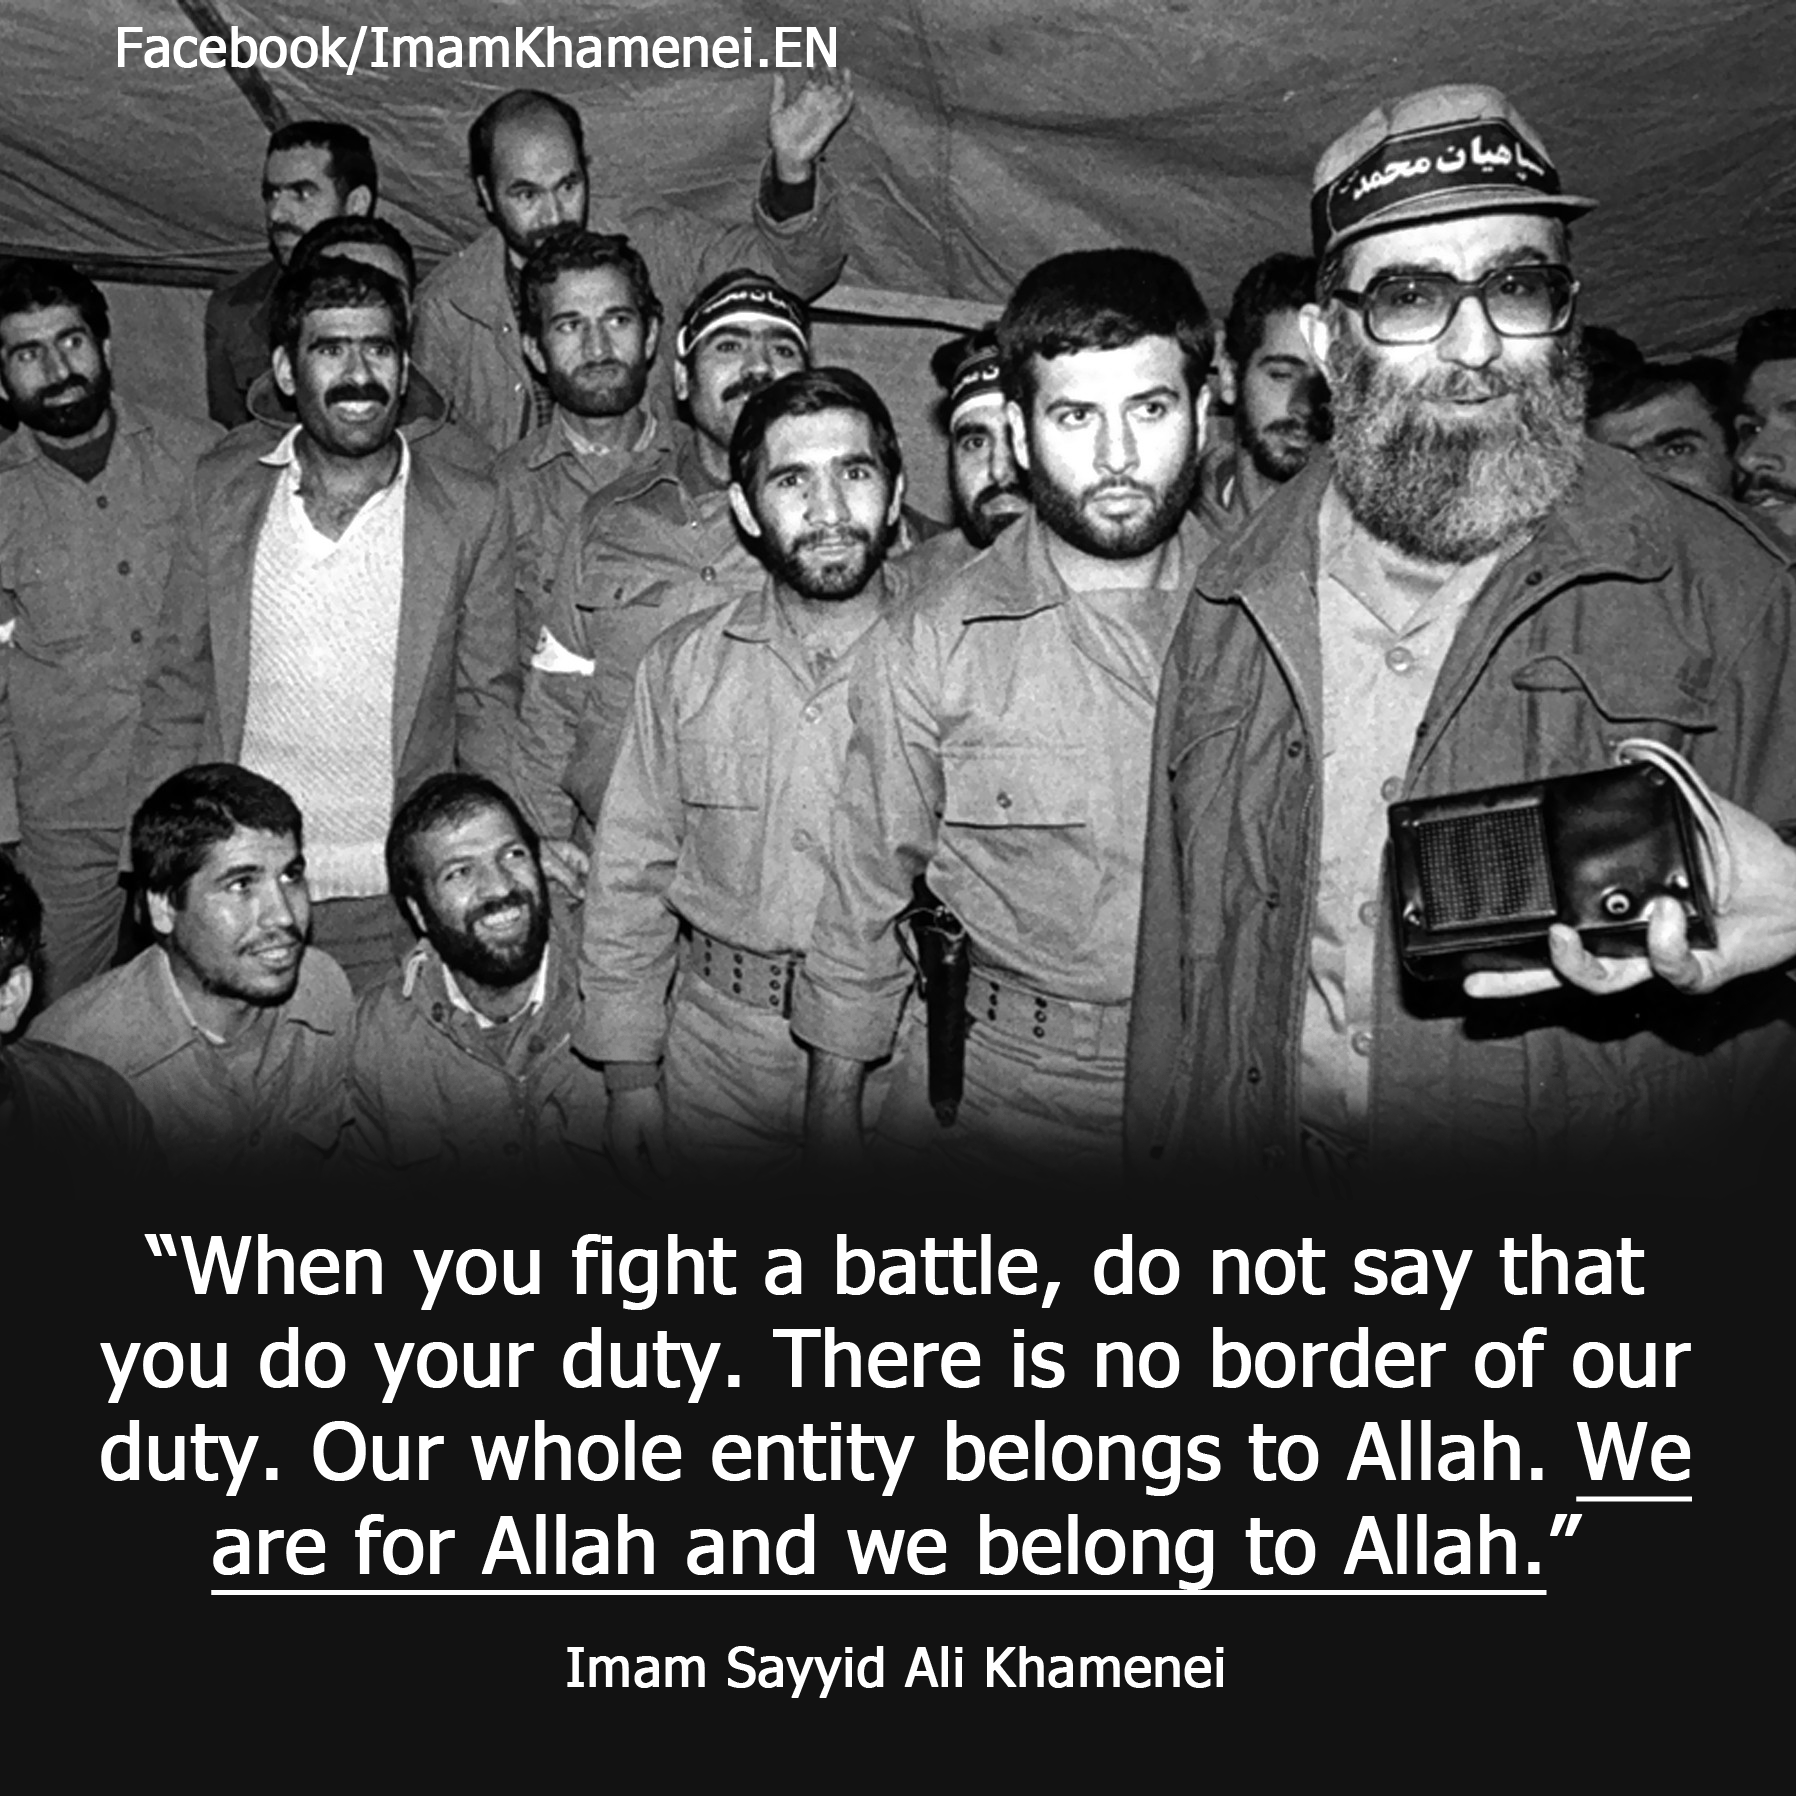 Photo of “When you fight a battle, do not say that you do your duty. There is no border of our duty. Our whole entity belongs to Allah. We are for Allah and we belong to Allah.”